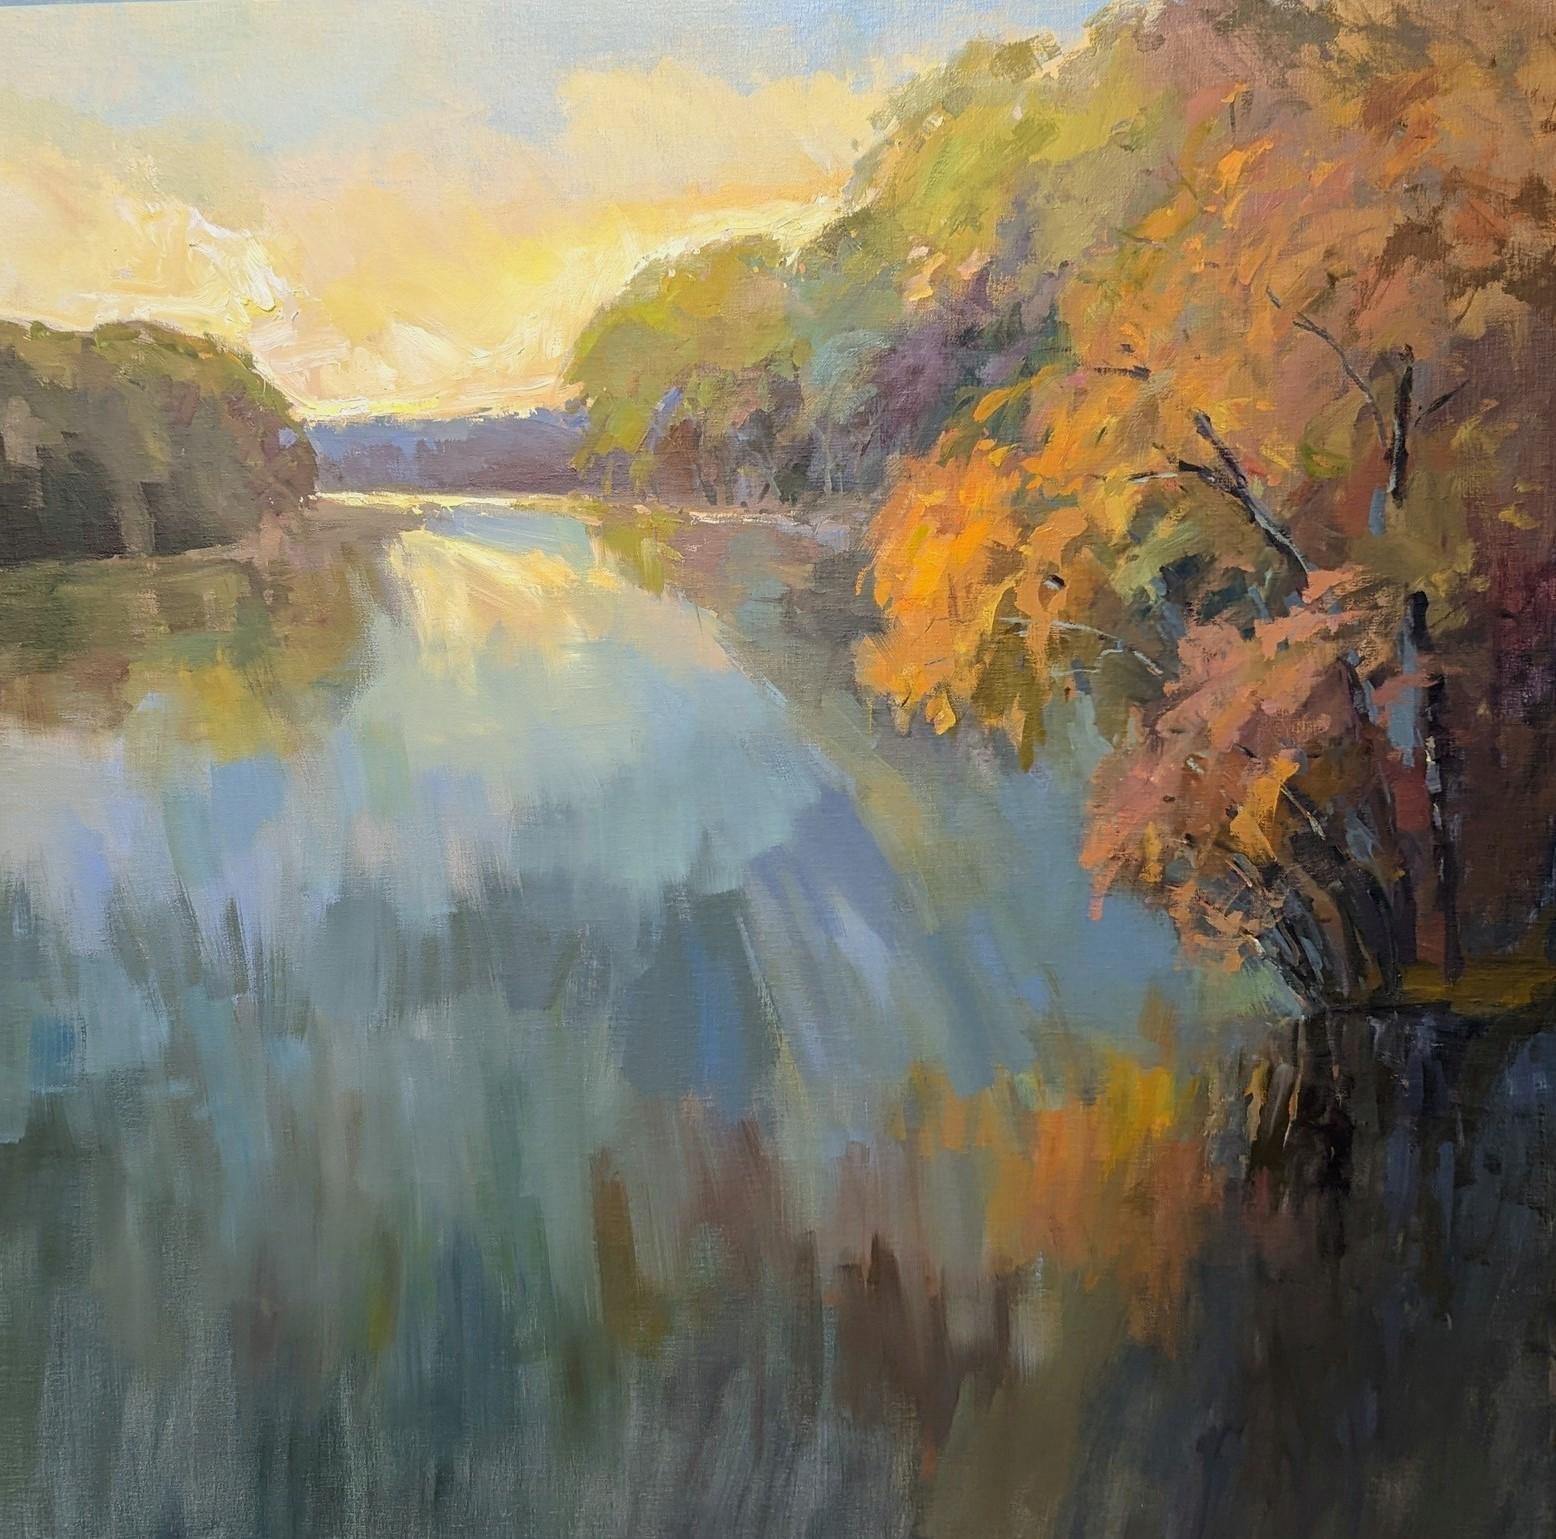 Without its frame, the painting measures 48 inches x 48 inches. 

Millie Gosch is an avid plein air painter who paints studies from real life and from these studies she creates her beautiful landscape pieces. An experienced artist, she has worked